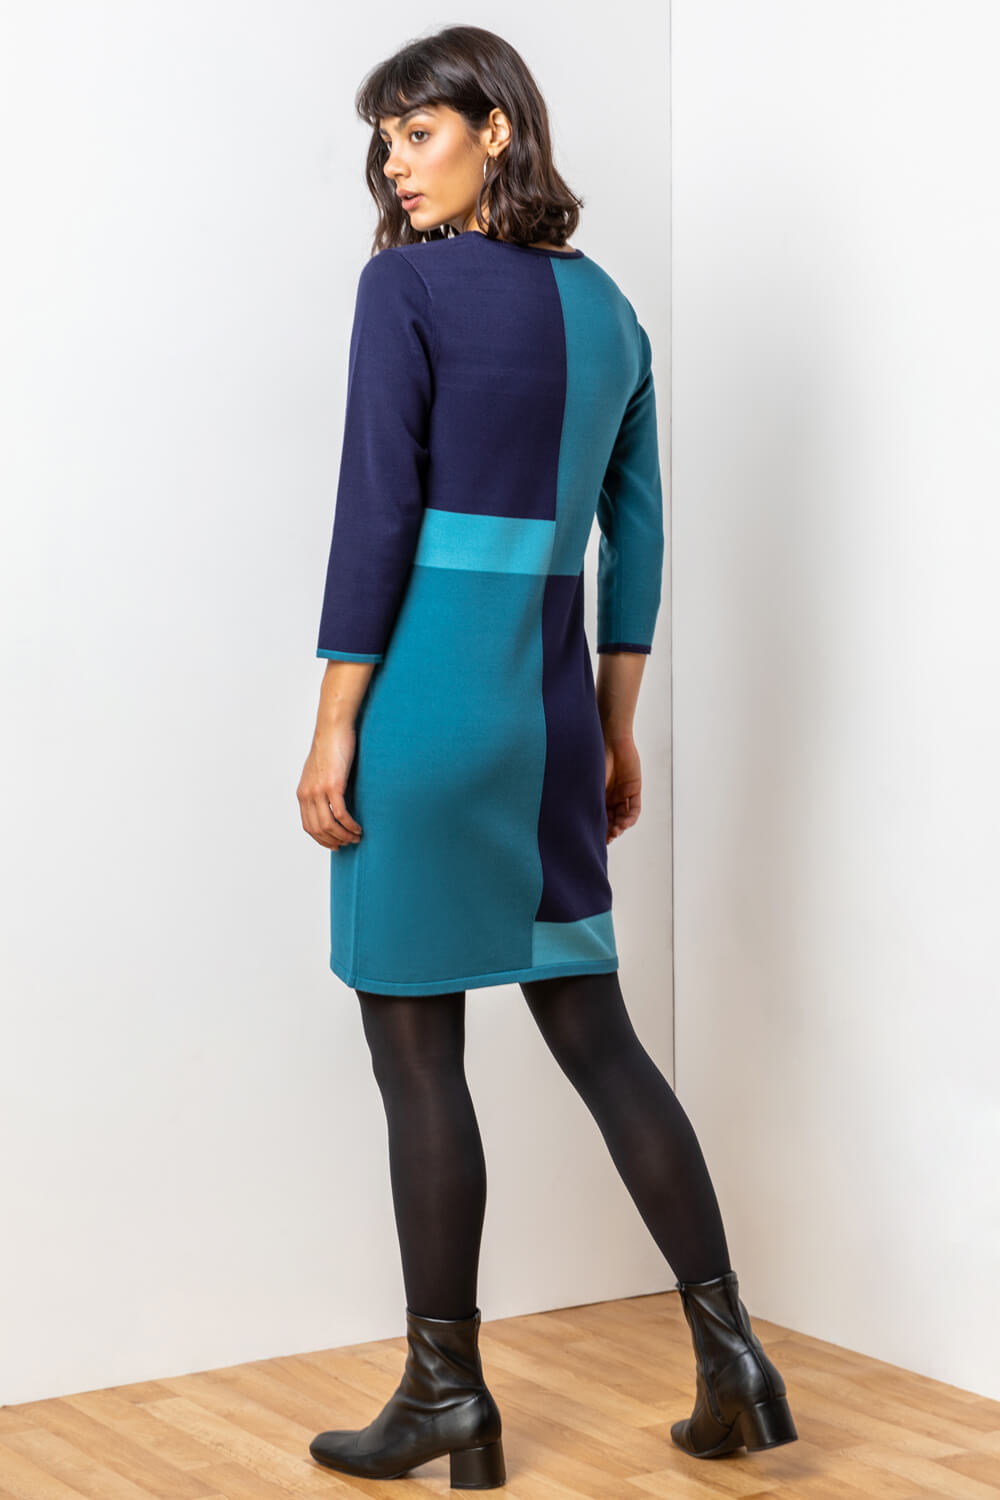 Blue Colour Block Knitted Dress, Image 2 of 5